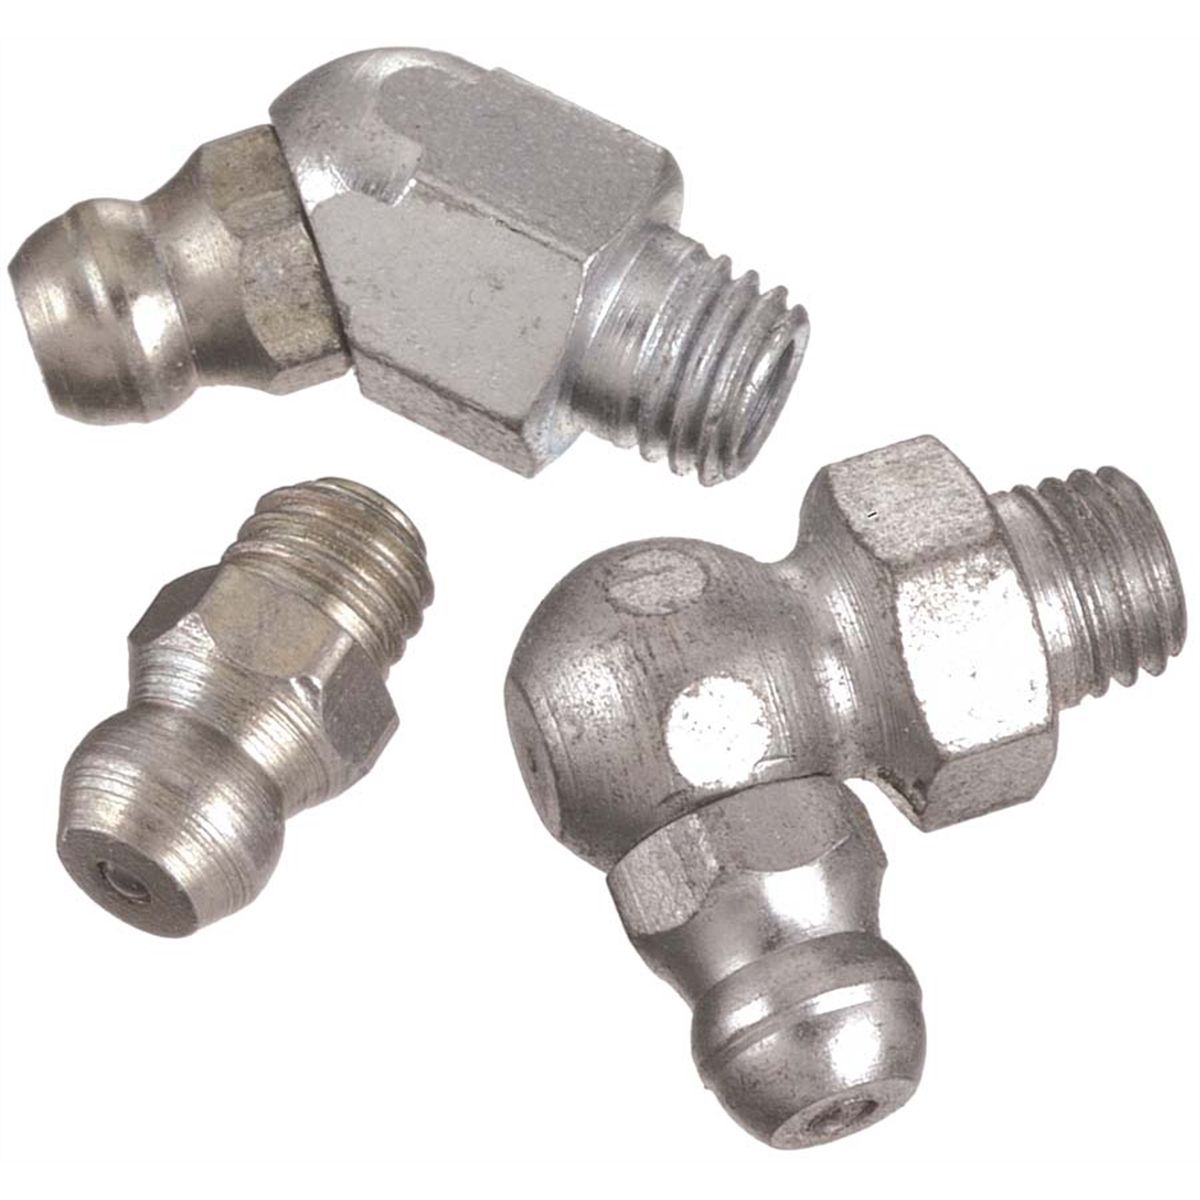 Mini Packaged Grease Fittings - Metric Threads